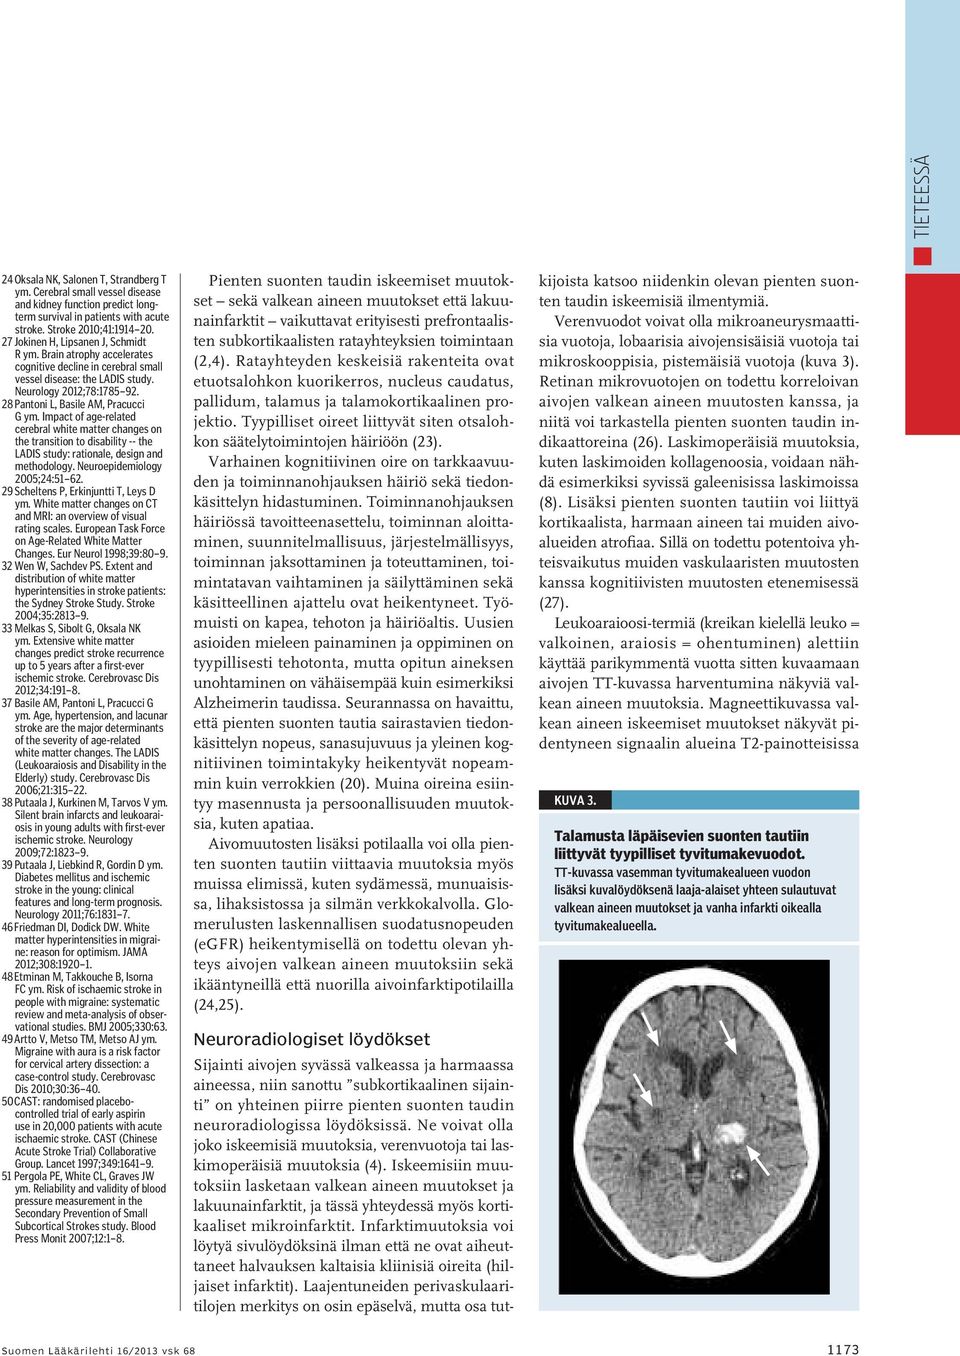 28 Pantoni L, Basile AM, Pracucci G ym. Impact of age-related cerebral white matter changes on the transition to disability -- the LADIS study: rationale, design and methodology.